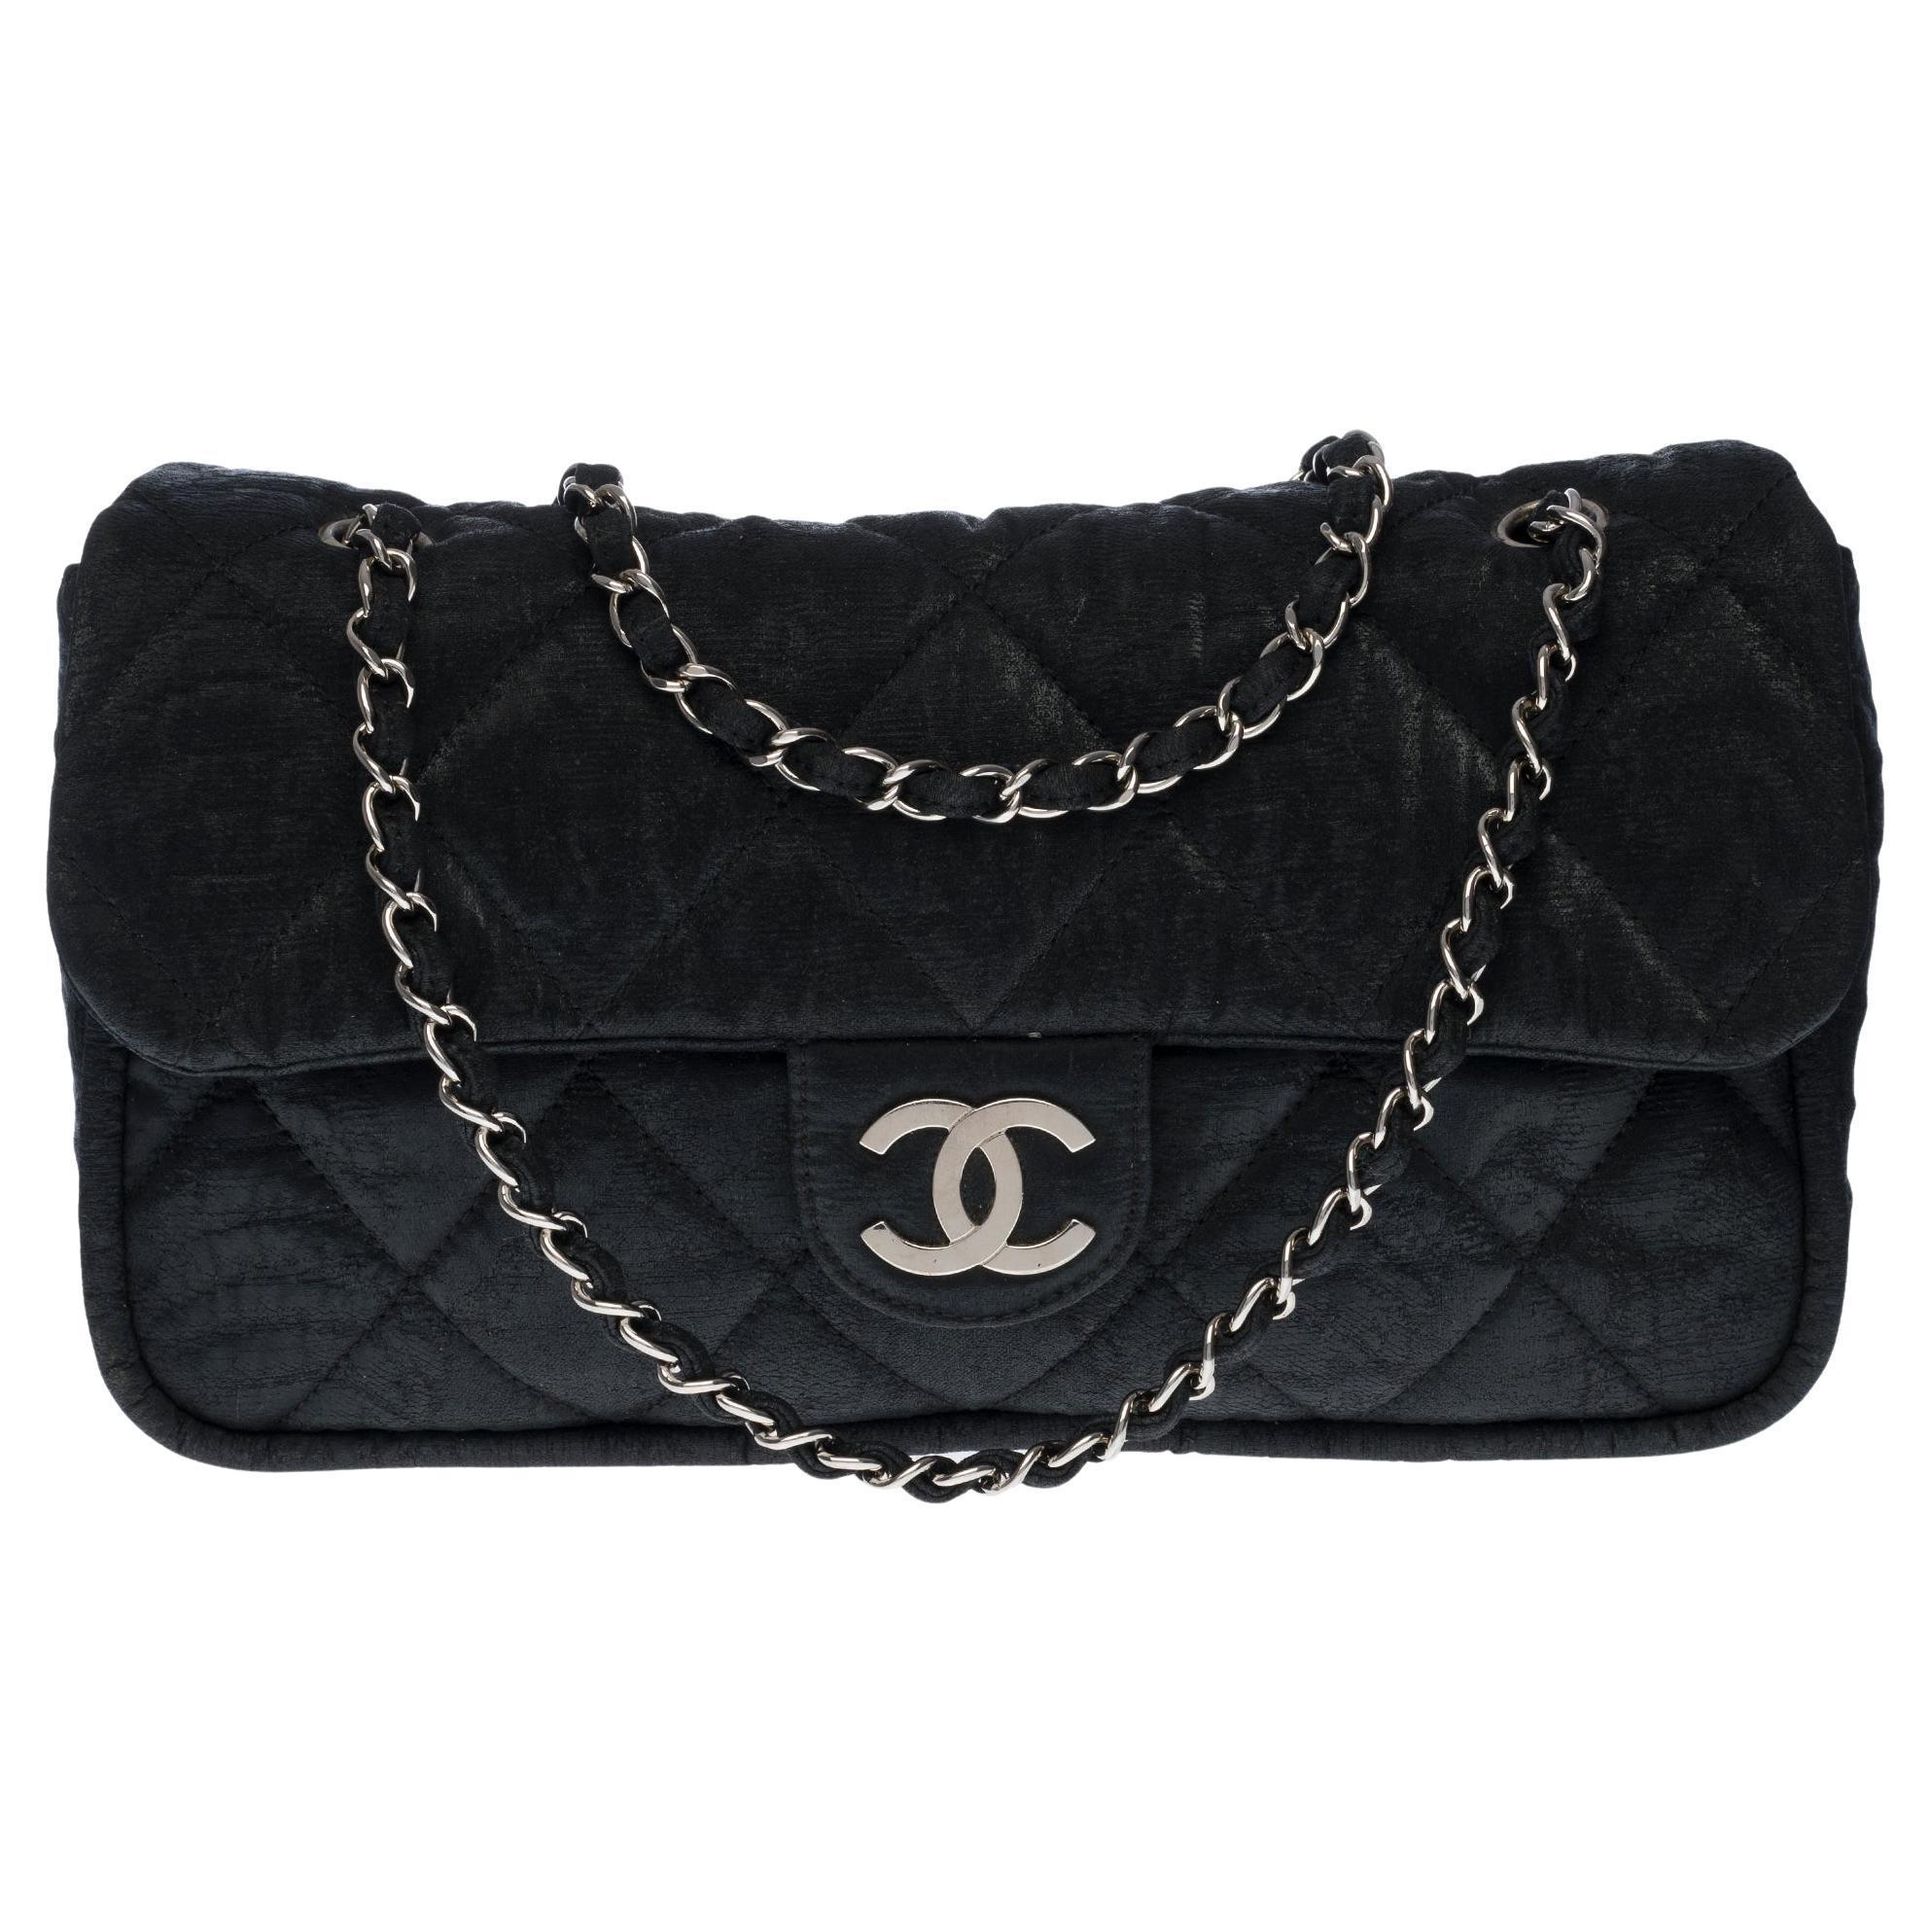 Chanel Classic Flap bag shoulder bag in black quilted fabric and silver hardware